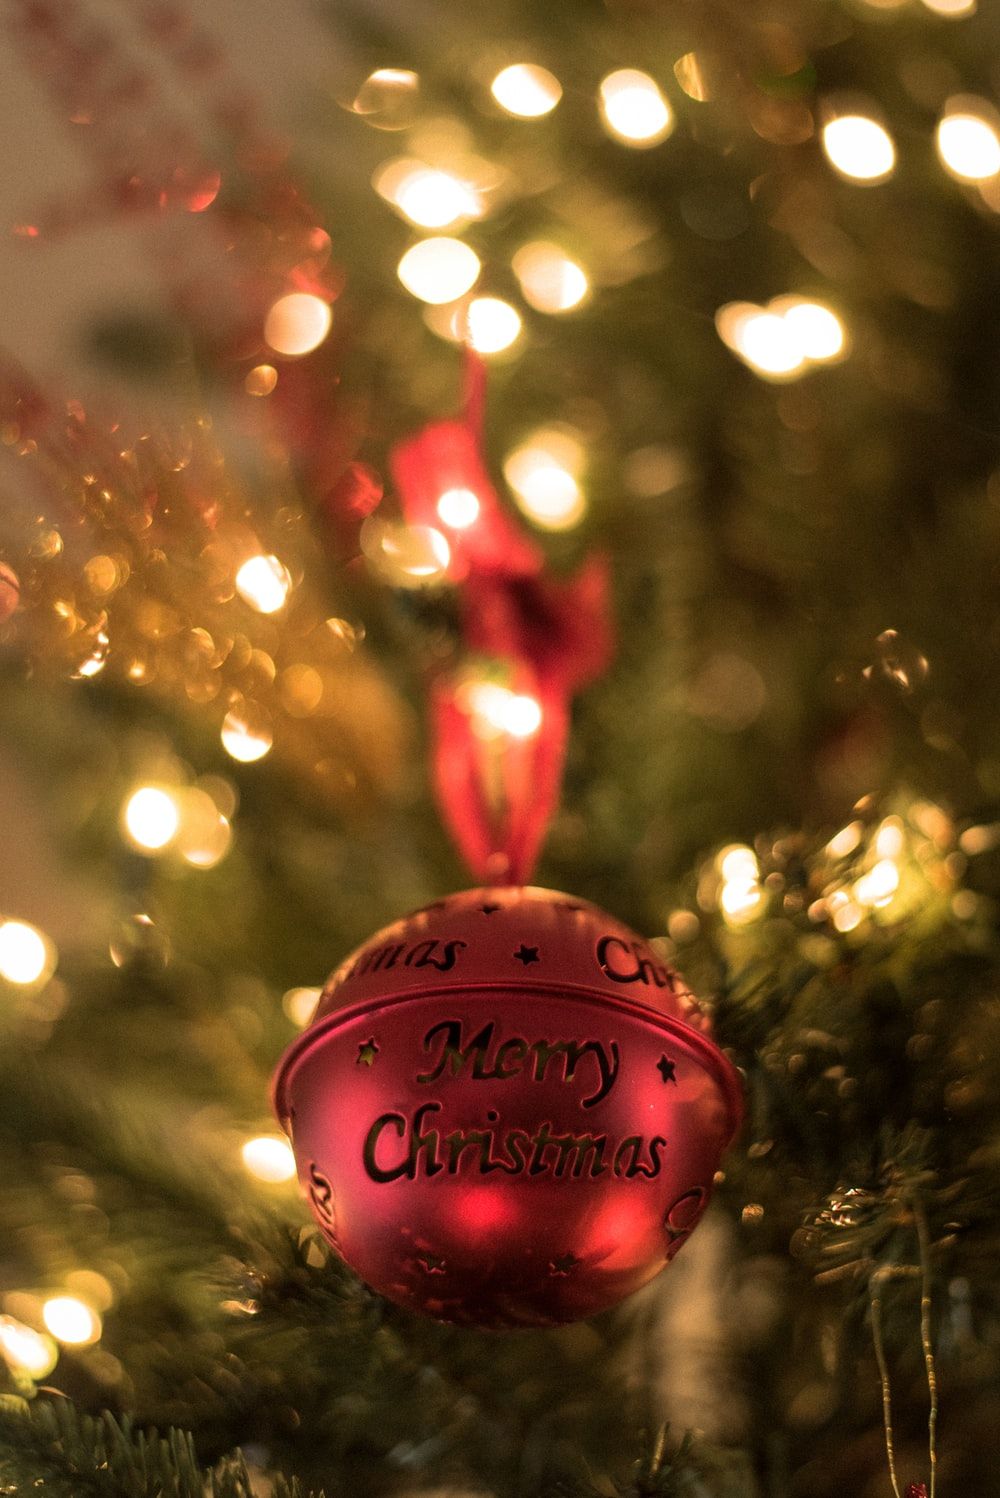 Merry Christmas Picture [HD]. Download Free Image